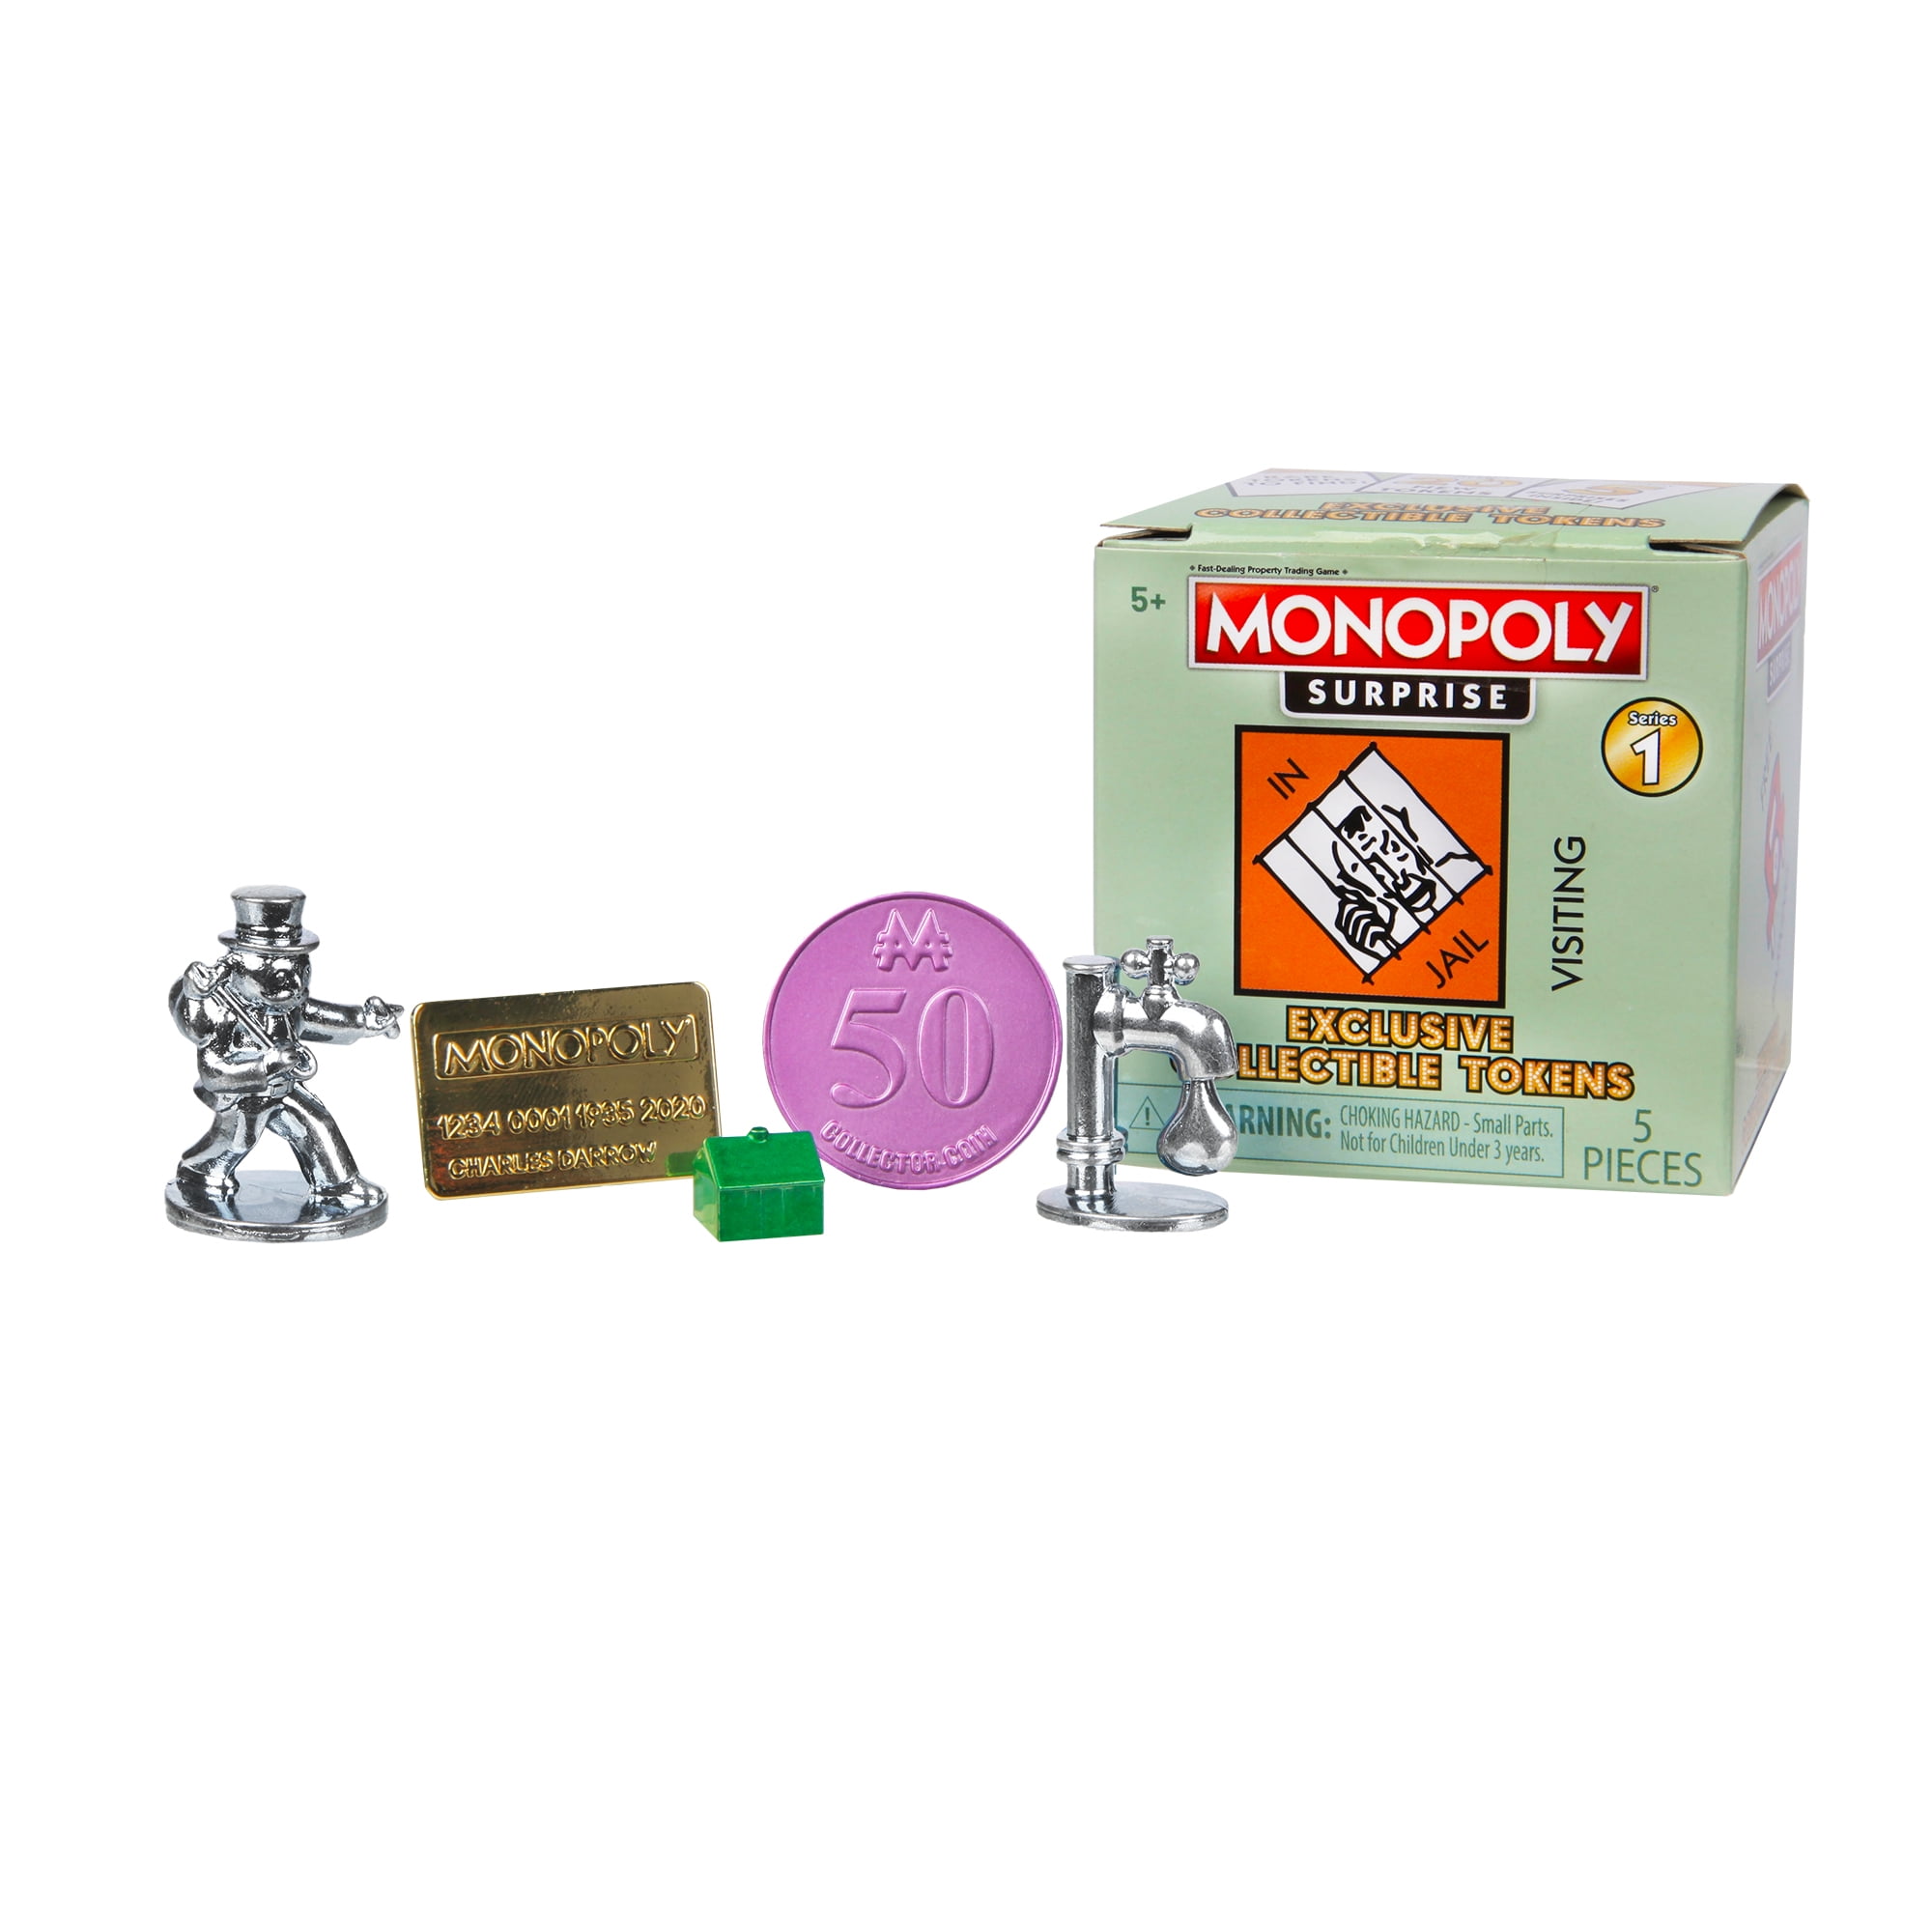 Hasbro Monopoly Surprise Series 1 Collectible Tokens 5 Piece for sale online 